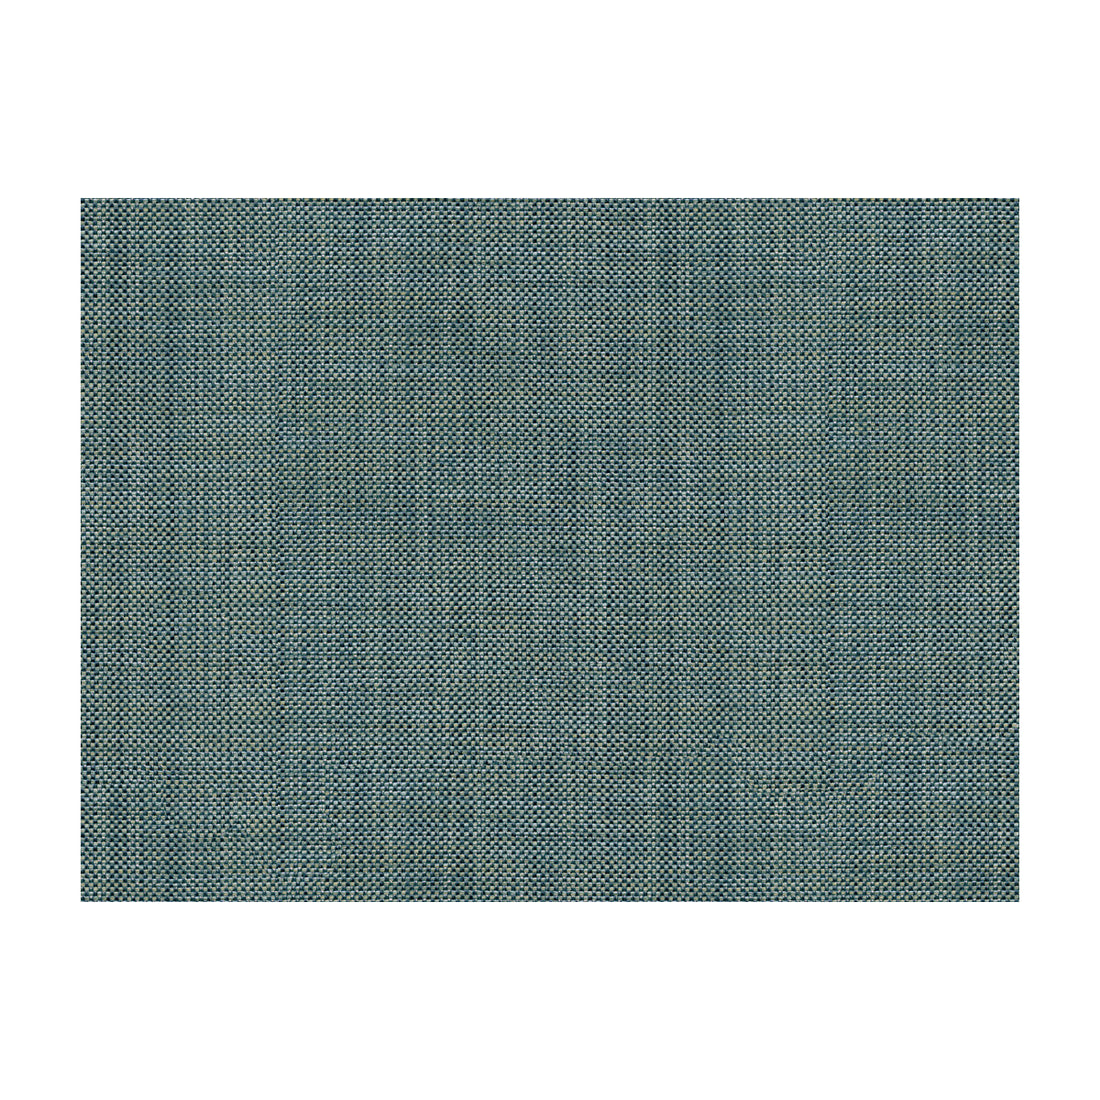 Kravet Basics fabric in 30299-50 color - pattern 30299.50.0 - by Kravet Basics in the Perfect Plains collection